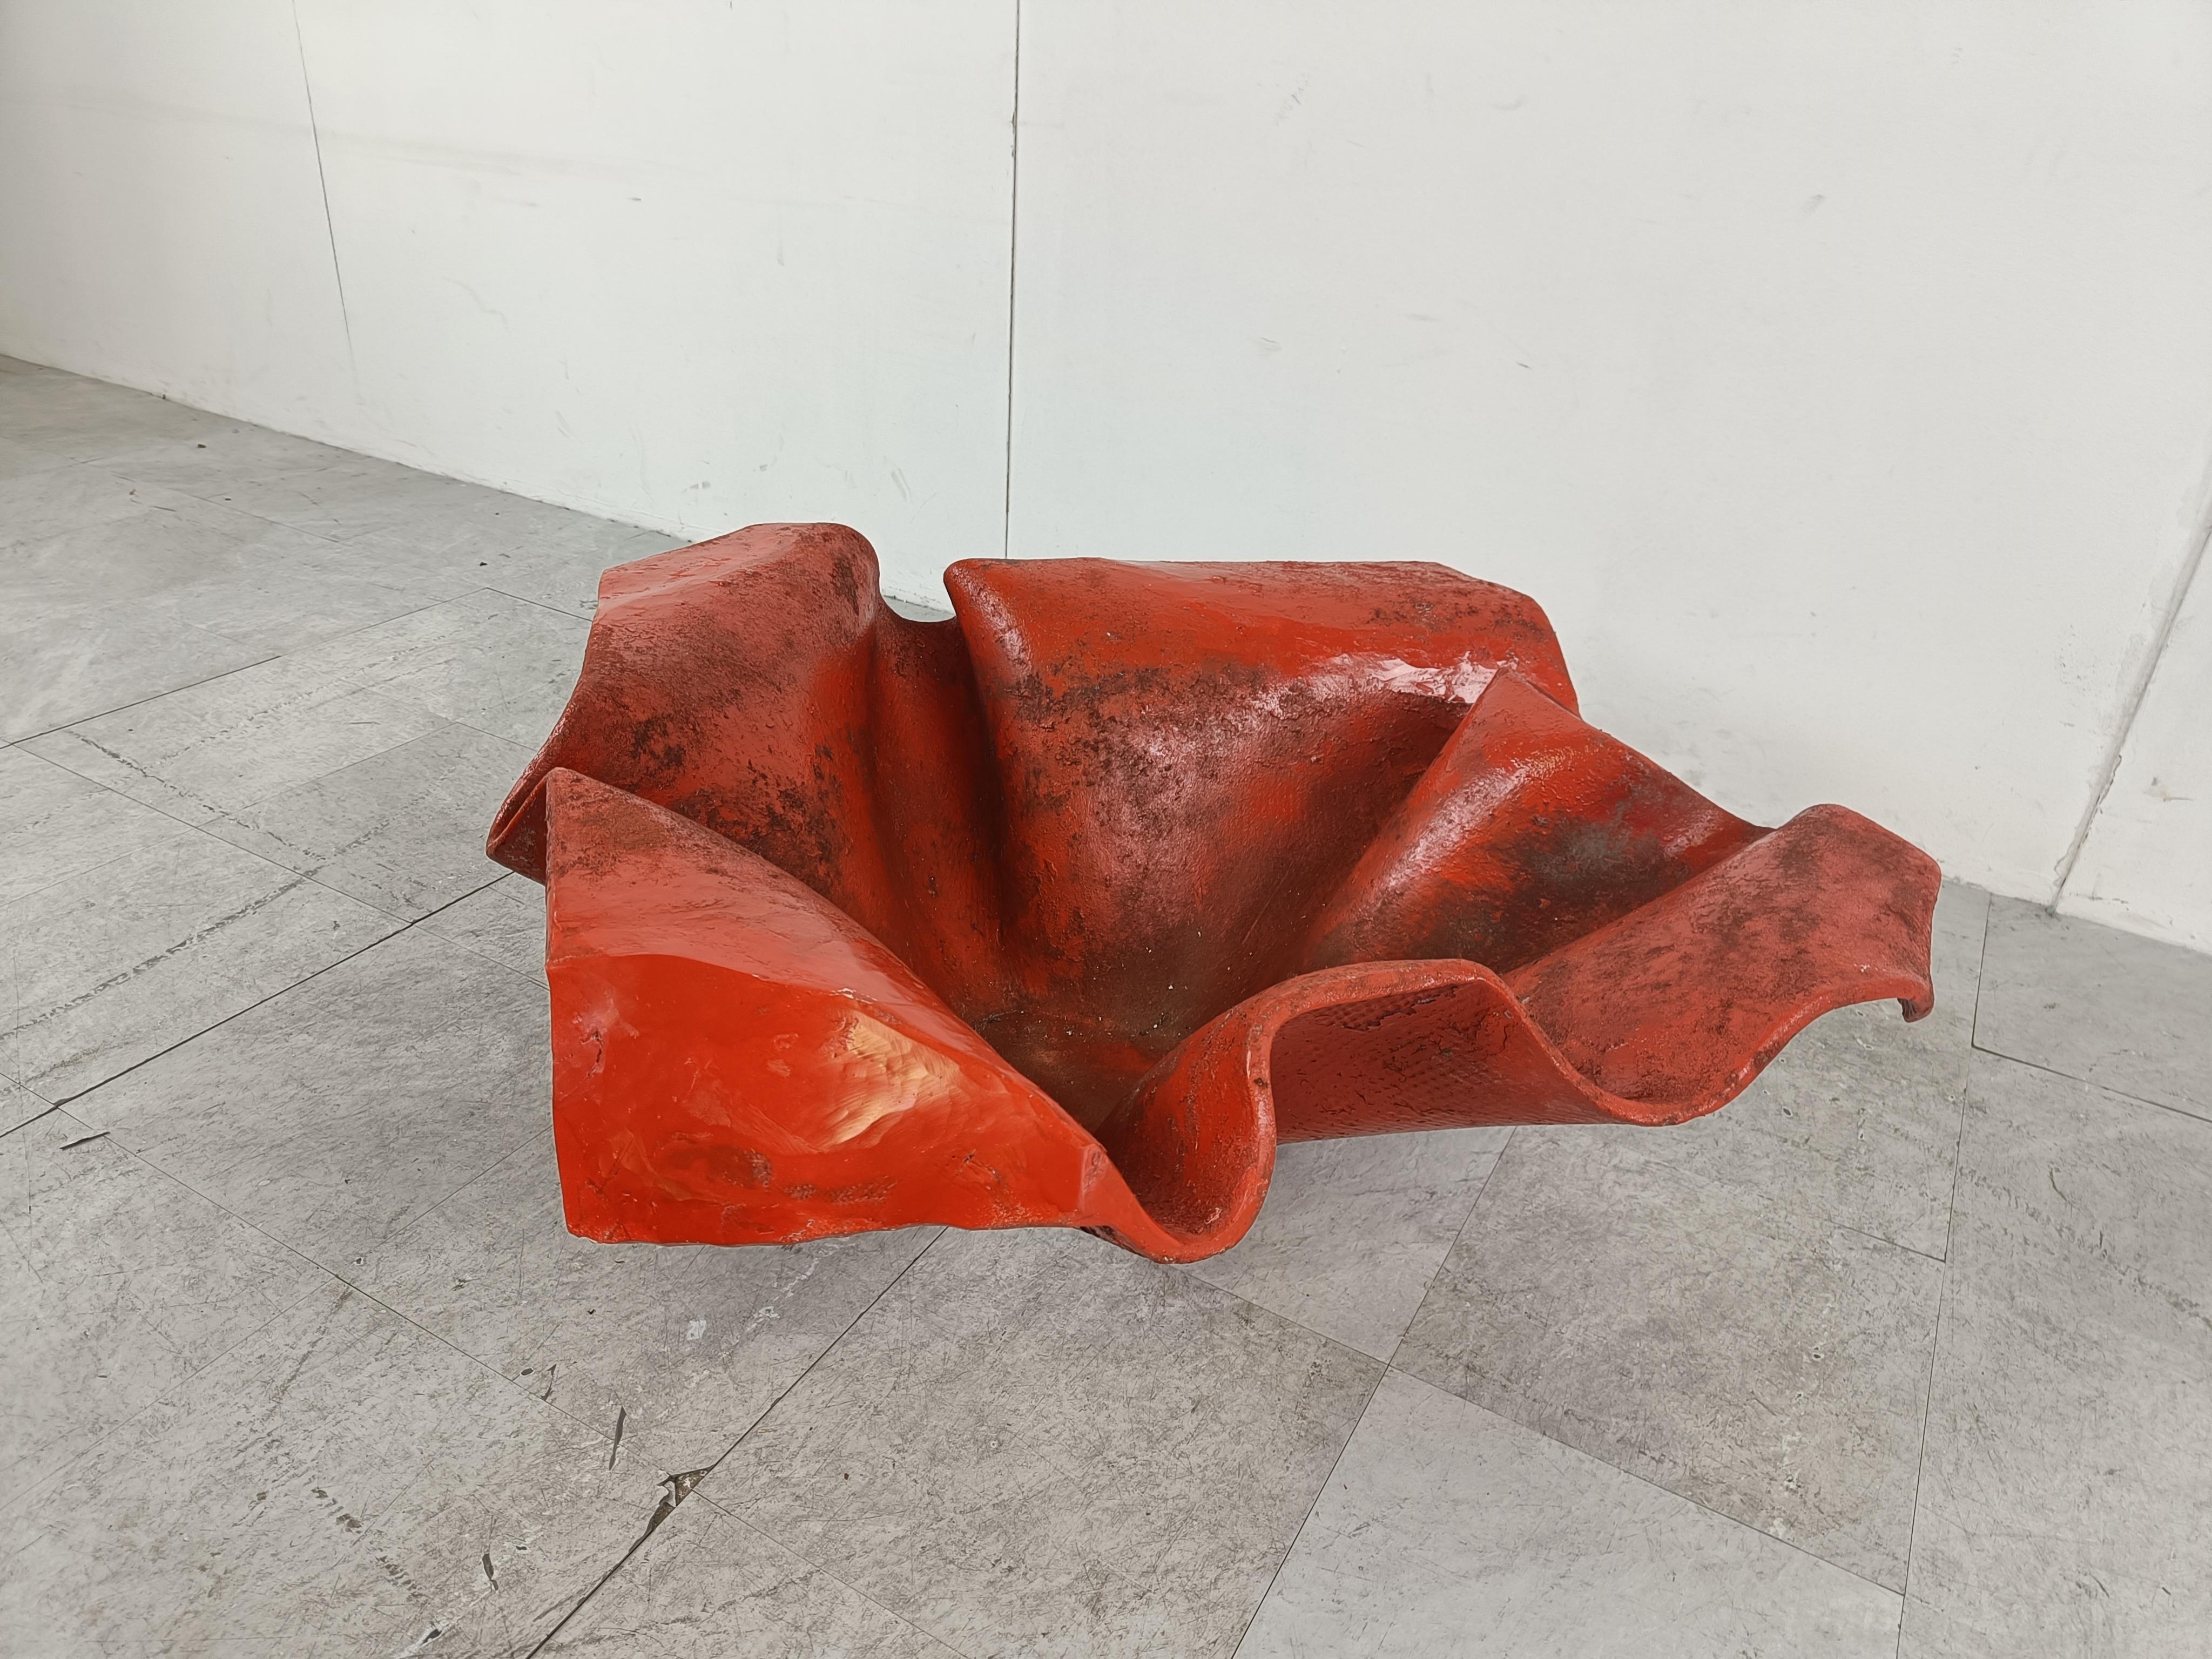 Decorative outdoor handkerchief shaped planter designed by Willy Guhl, produced by Eternit AG, Switzerland 

This planter is made of cellulose infused fiber cement. 

It has a nice patina from outdoor usage.

Good condition

1960s -